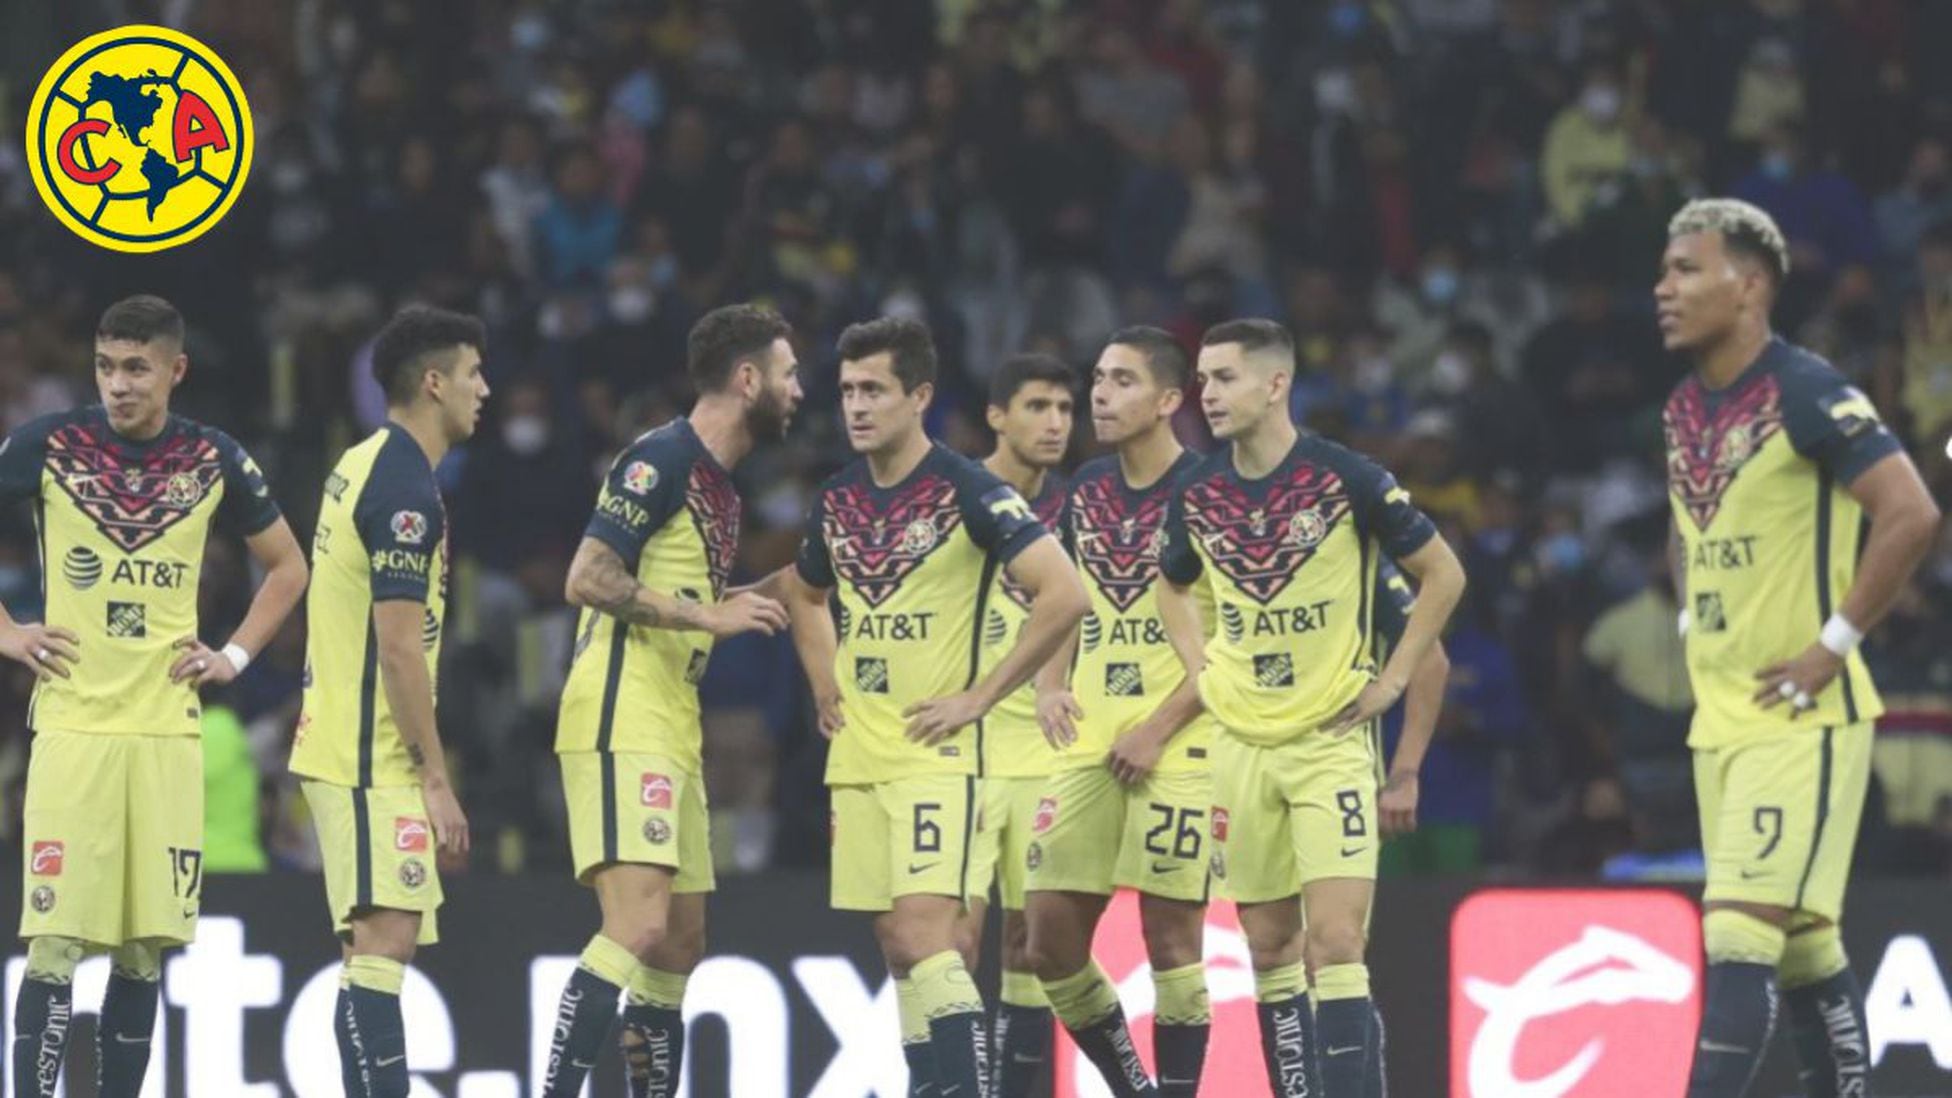 CLUB AMERICA OFFICIAL NAME & NUMBER SET WITH LIGA MX PATCH 